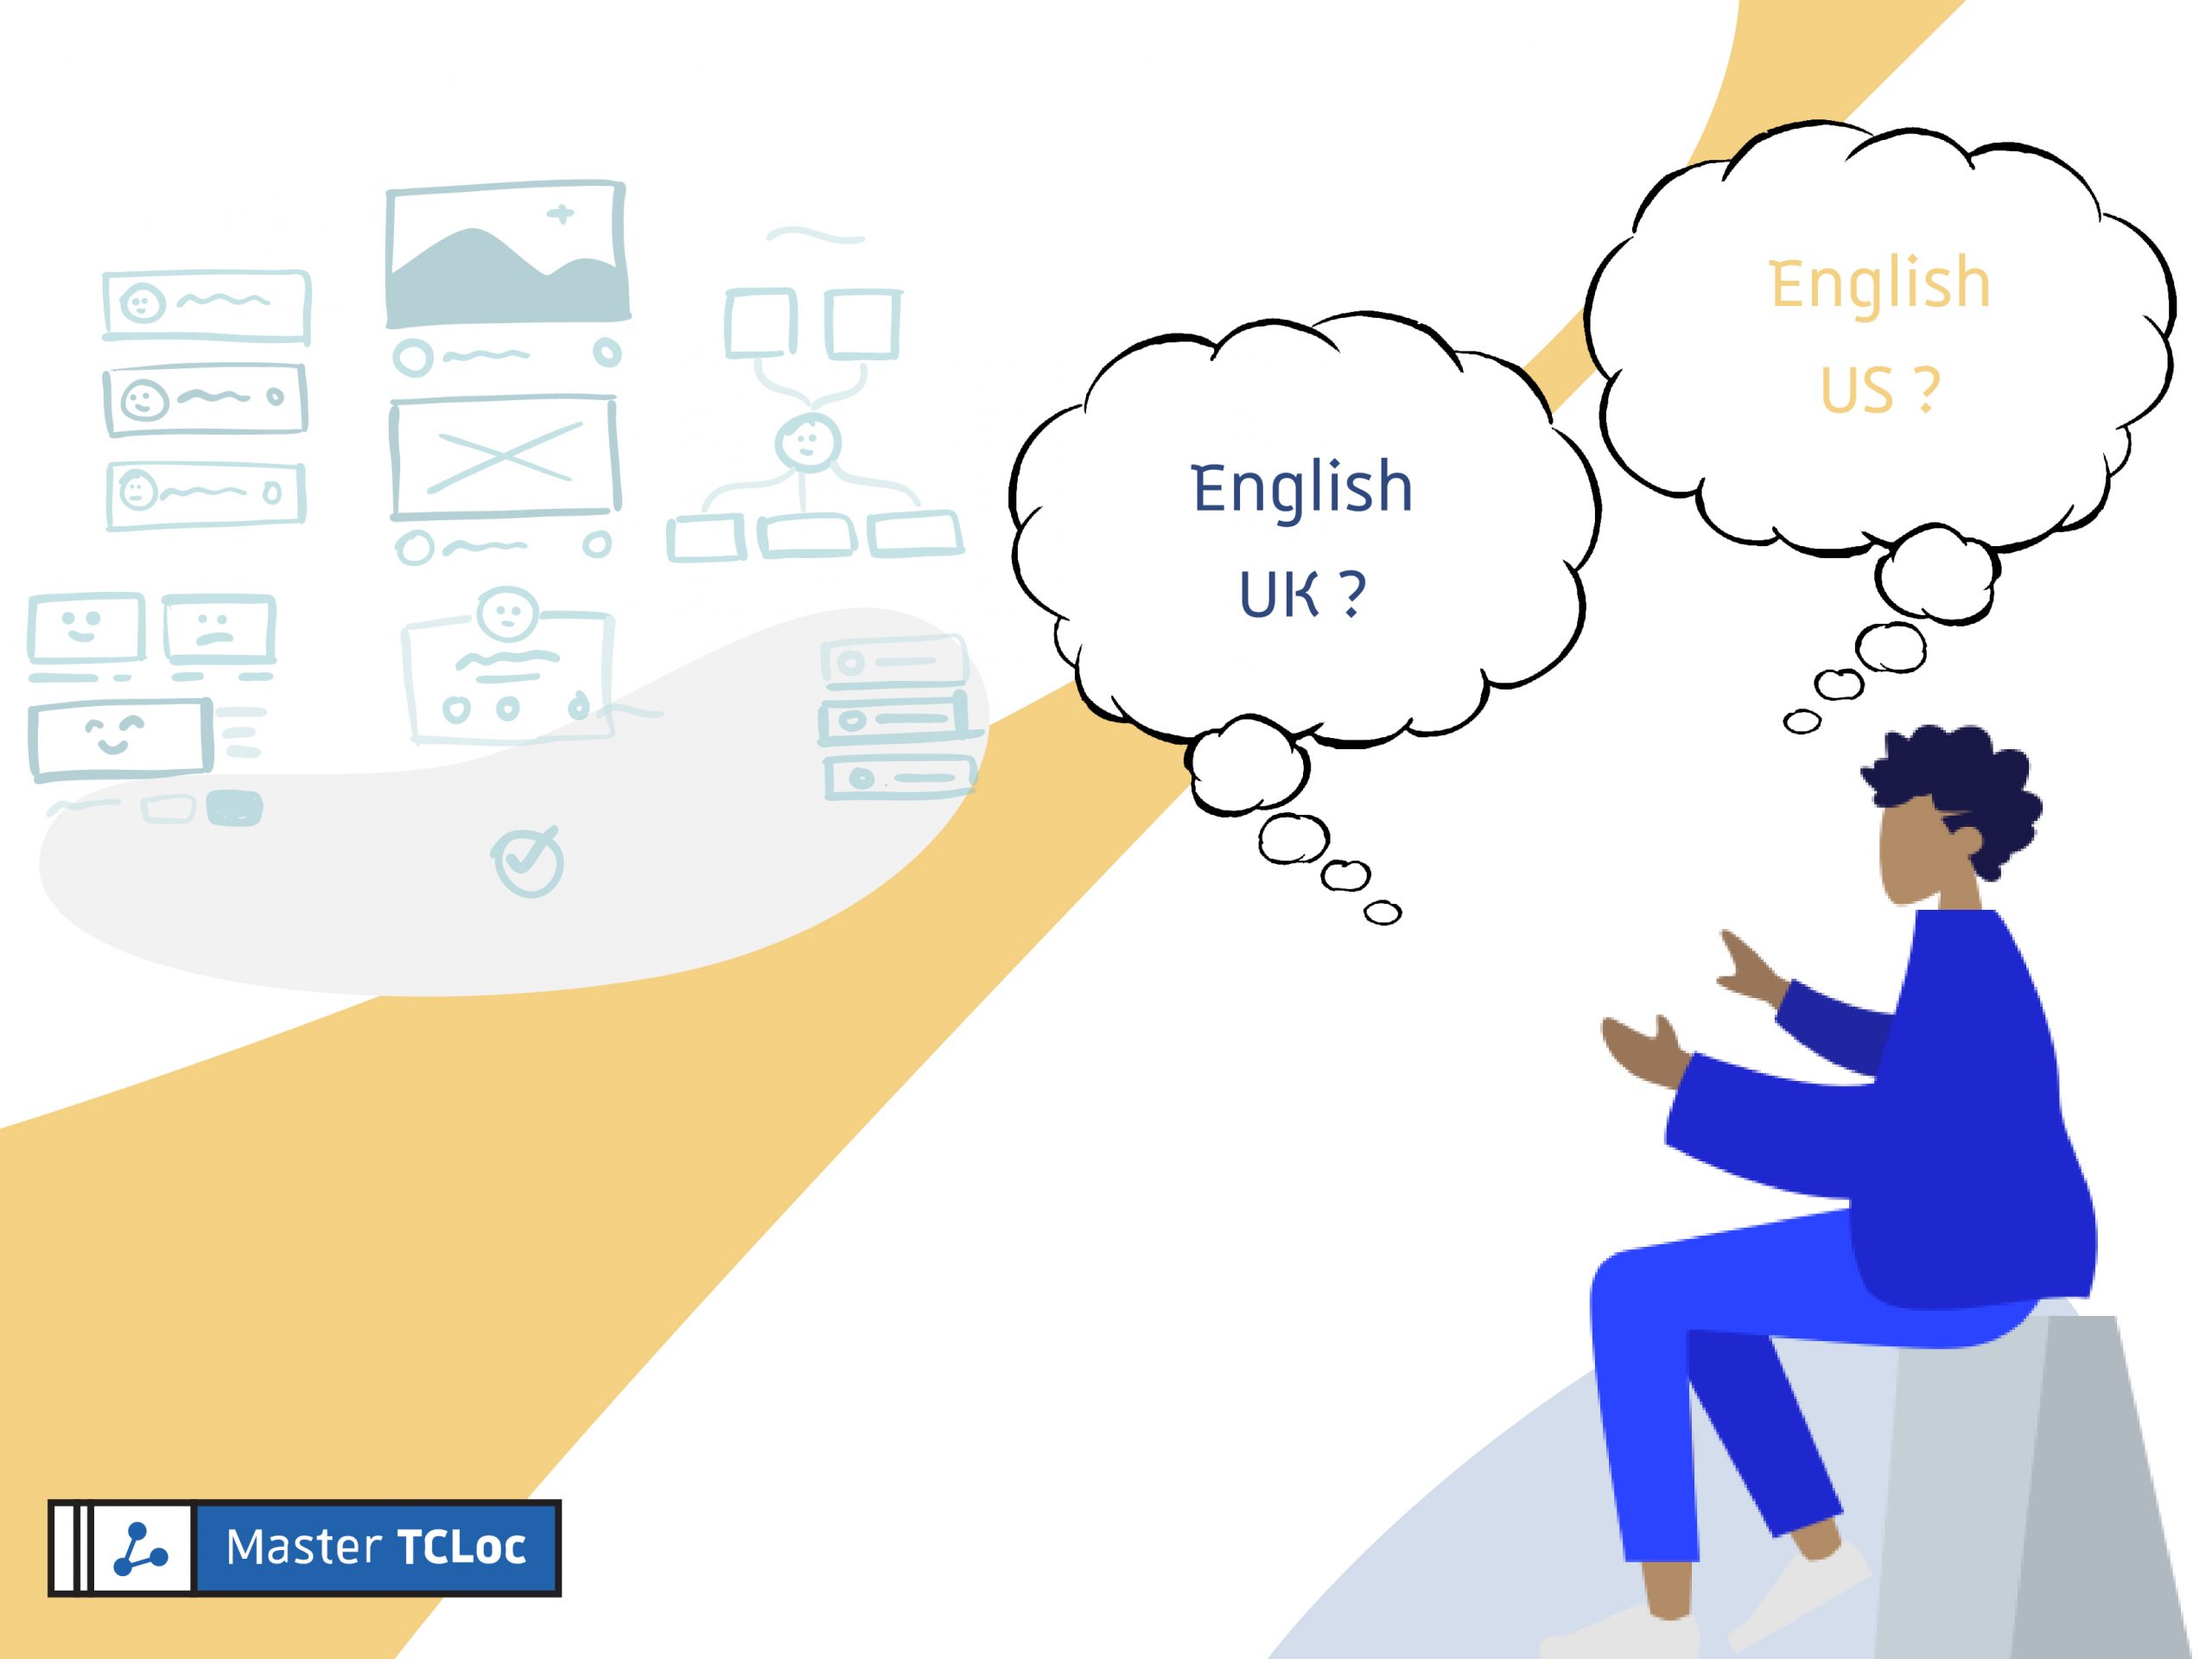 Two thought bubbles coming from a sitting figure containing a question each: UK English? and US English?